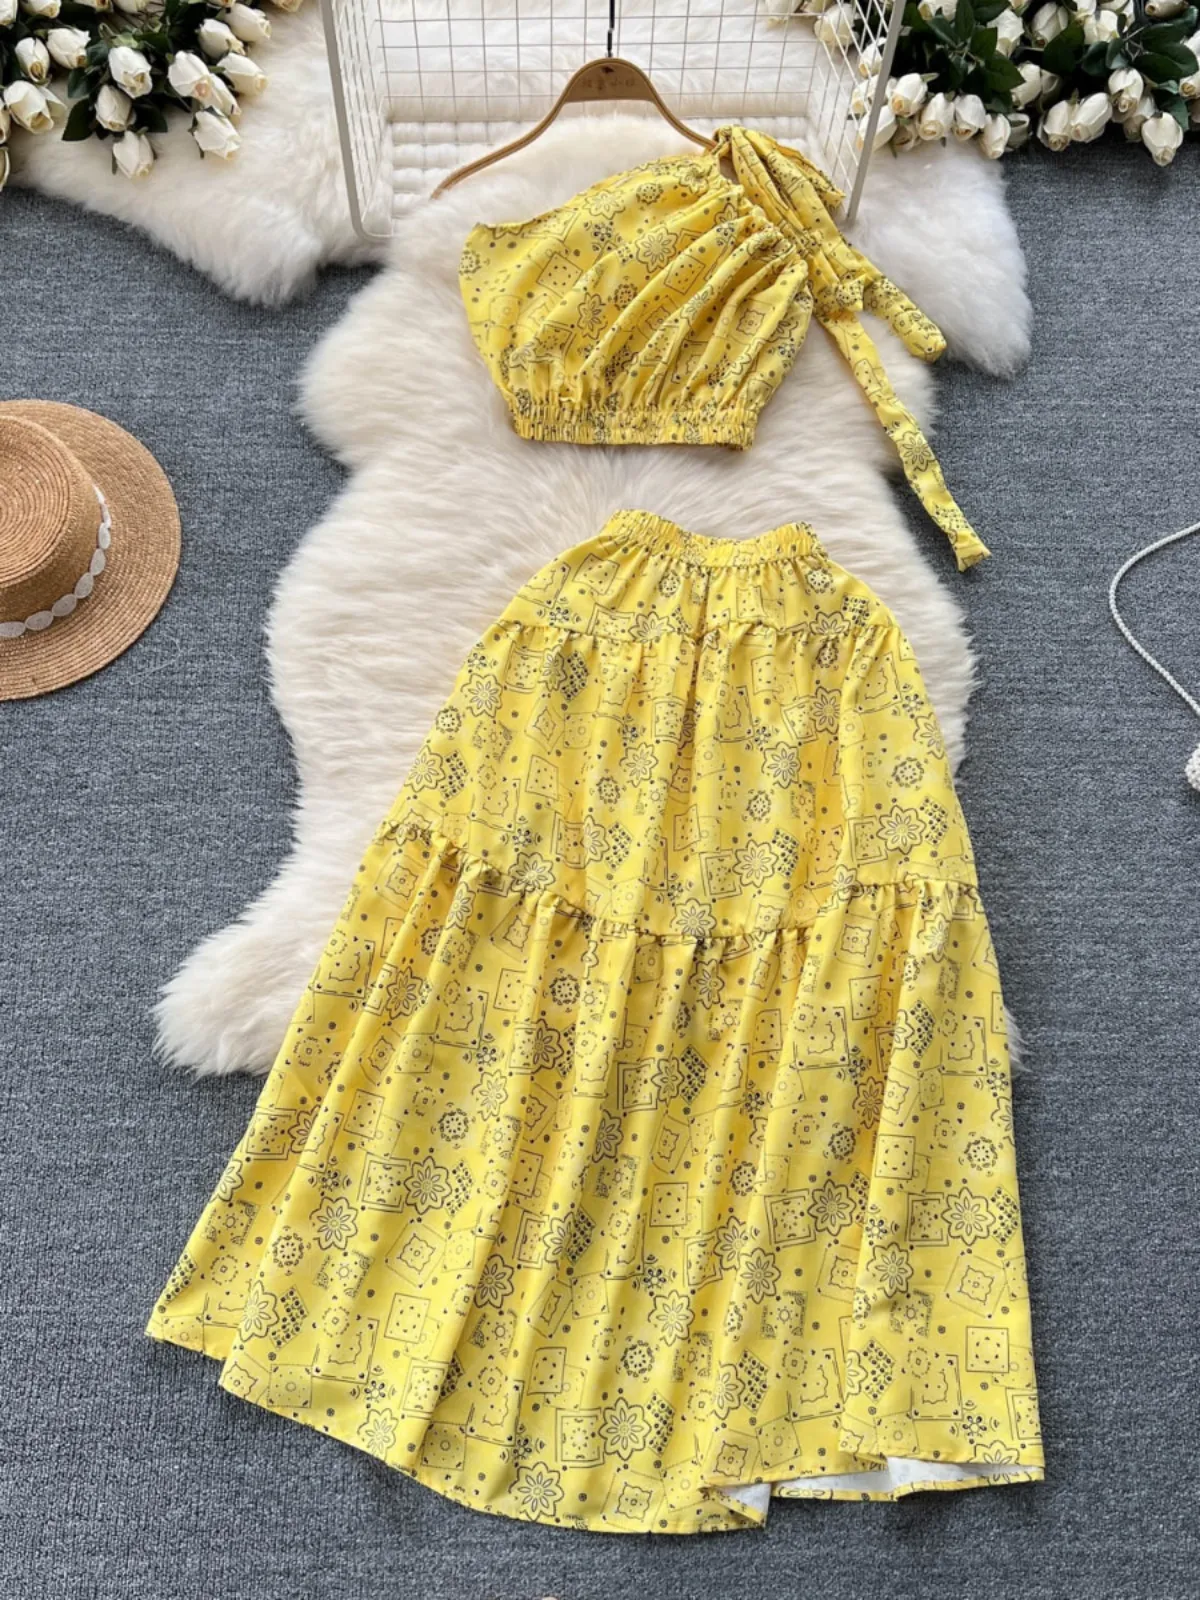 Thai style holiday outfit for women, Instagram pure desire, sexy diagonal collar, off shoulder strapless top, high waisted skirt, printed set